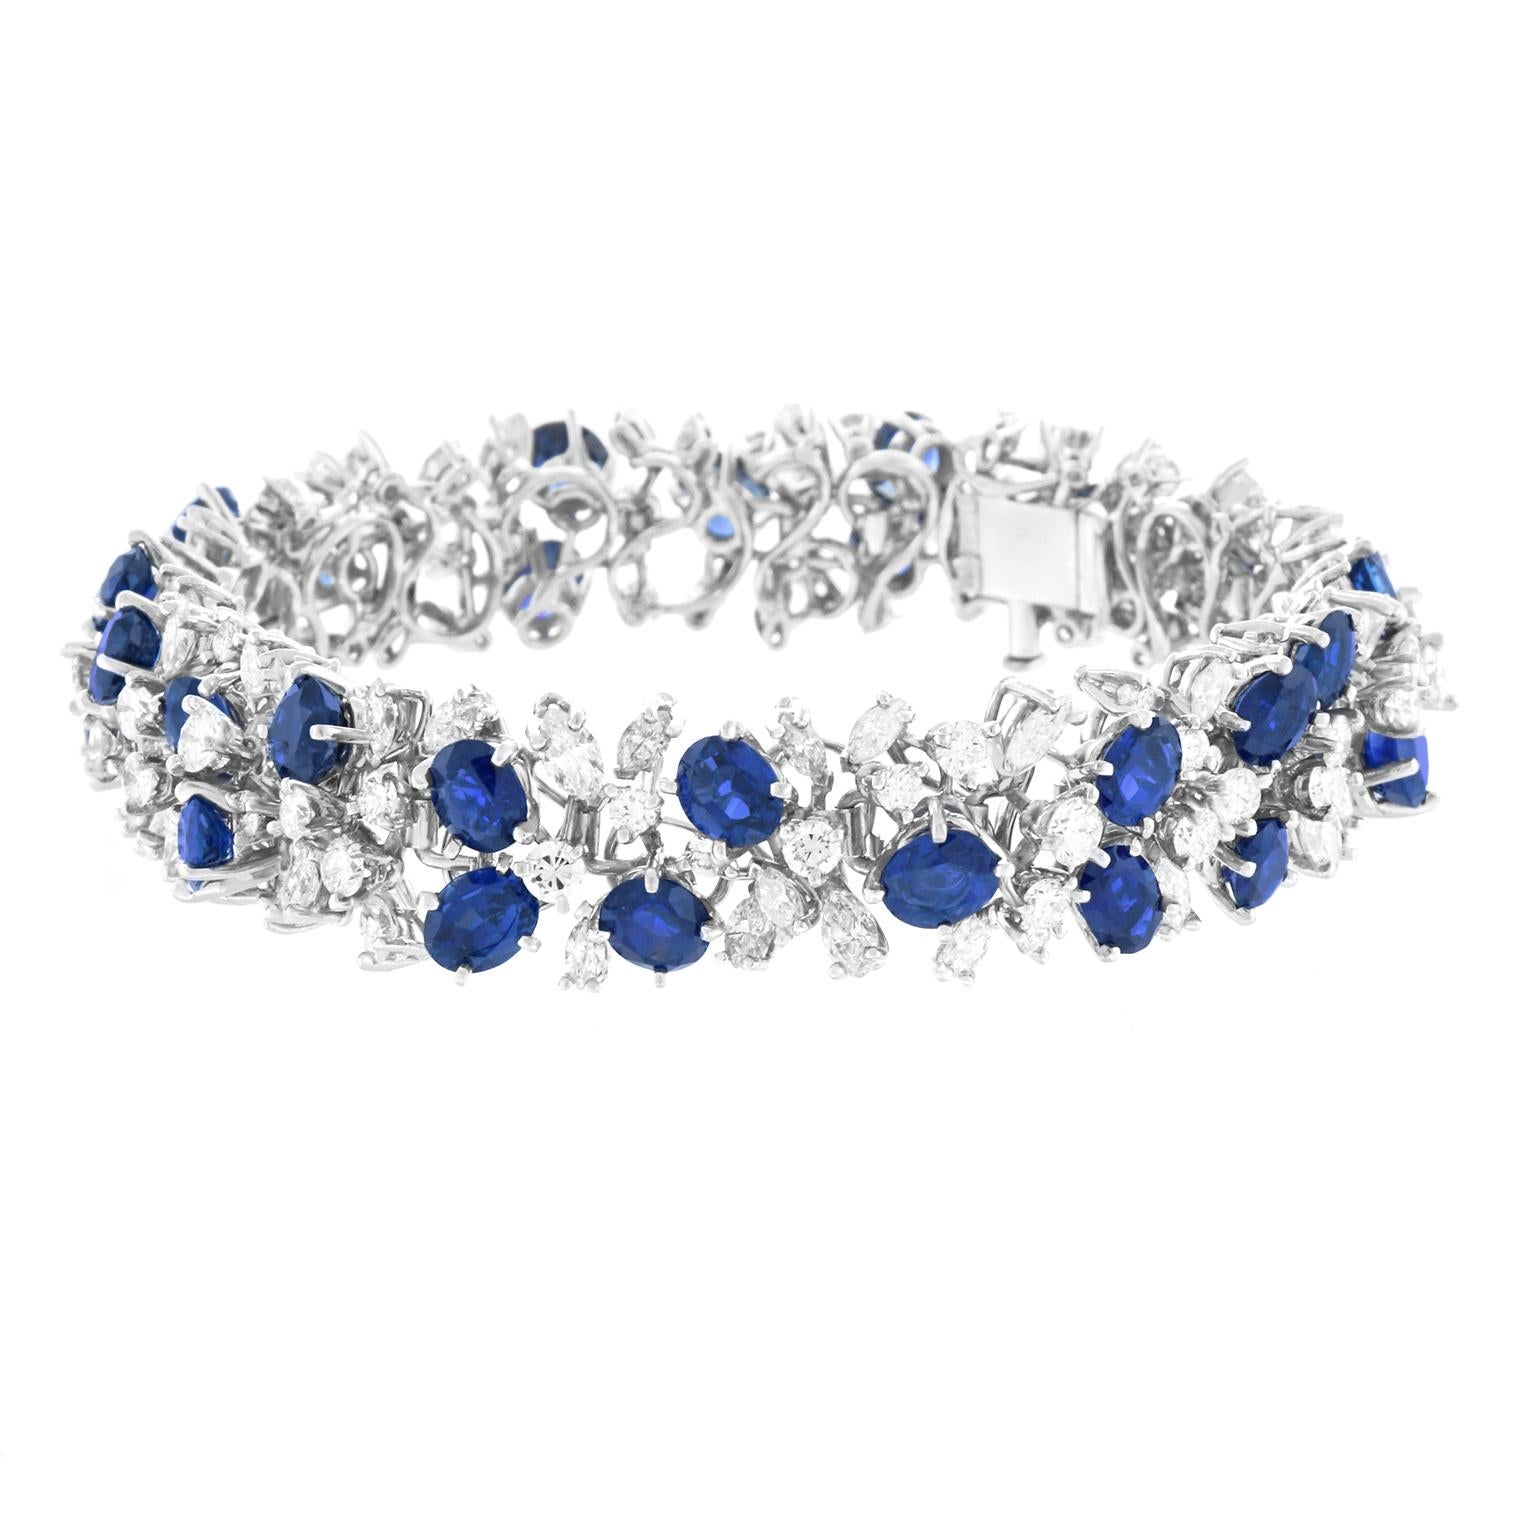 Necklace-        Circa 1960s, 18k, by Emil Meister, Zurich, Switzerland. Set with an incredible 30.0 carats of sublime blue sapphires and 35.0 carats of brilliant white diamonds (G color, VS clarity), this one-of-a-kind necklace from the esteemed